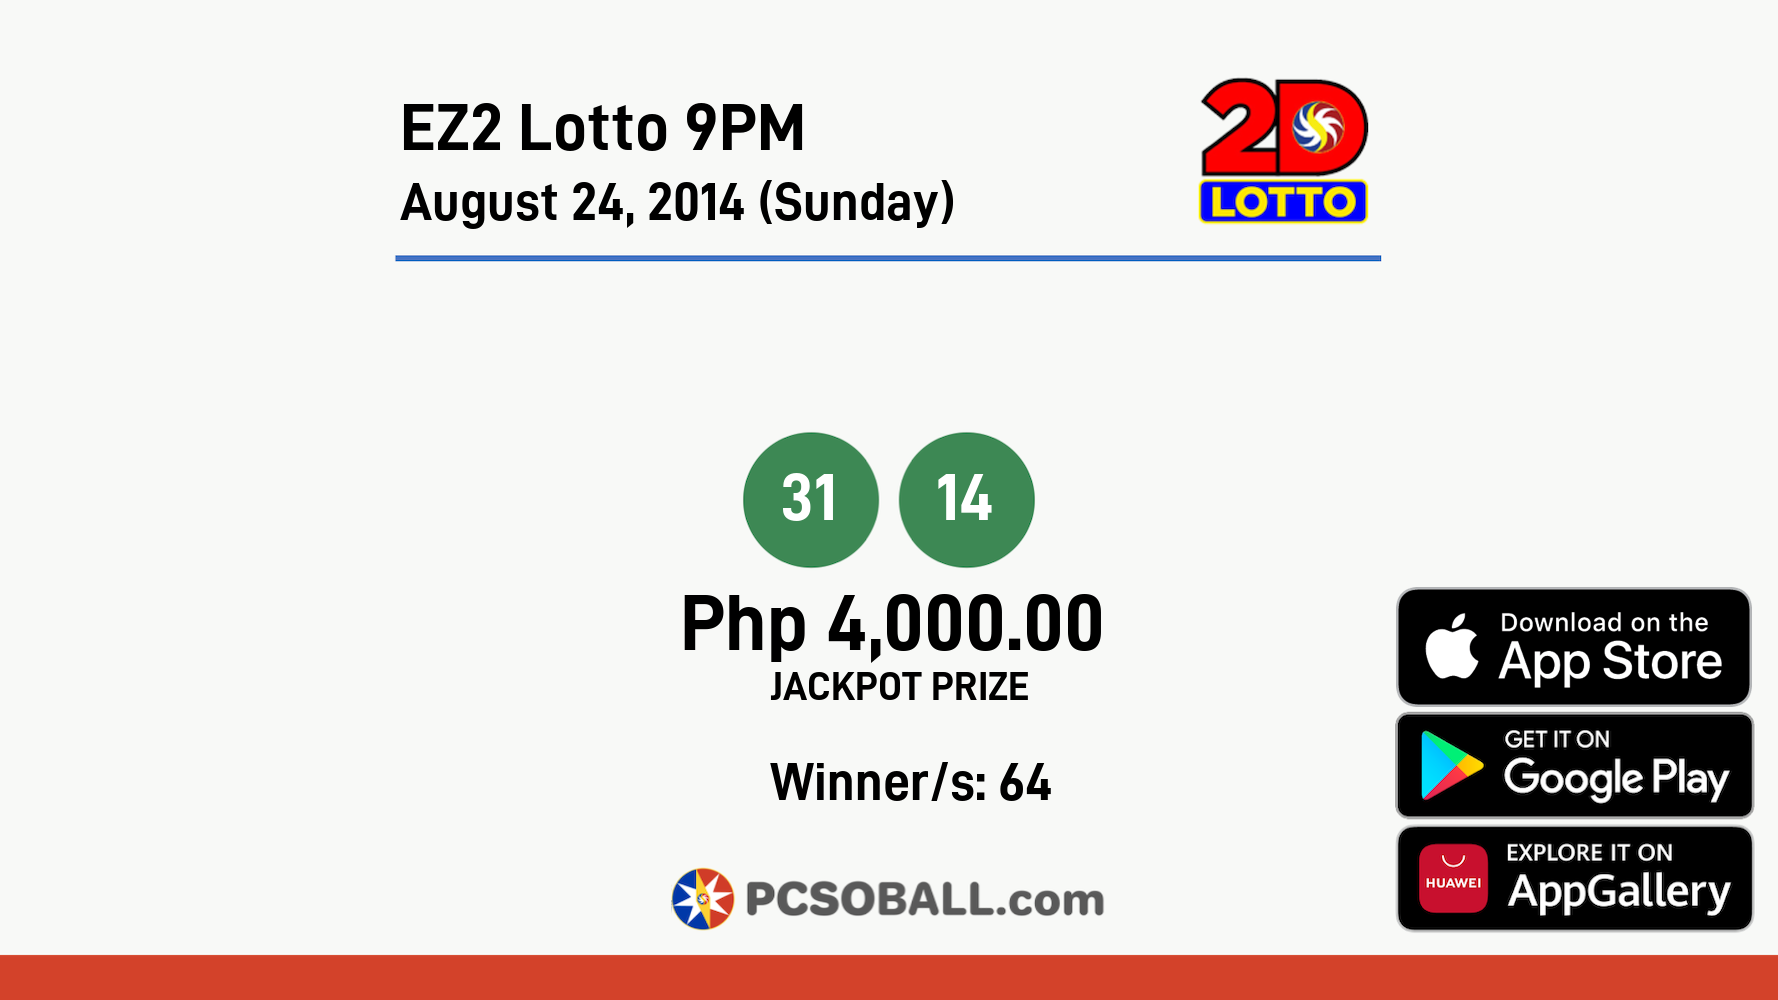 EZ2 Lotto 9PM August 24, 2014 (Sunday) Result